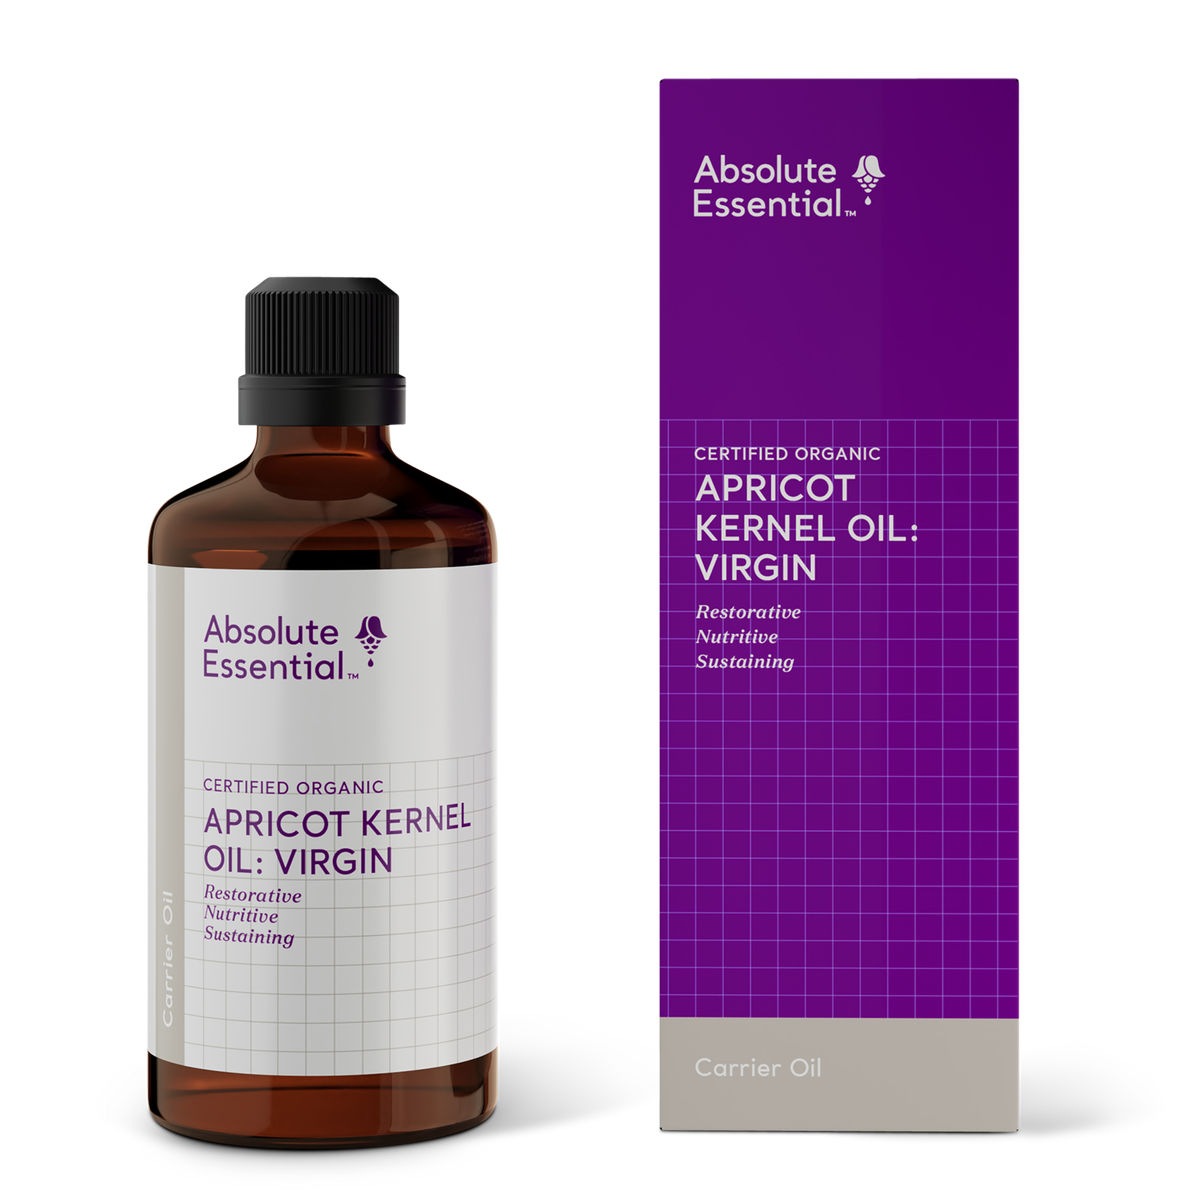 Absolute Essential Apricot Kernel Oil